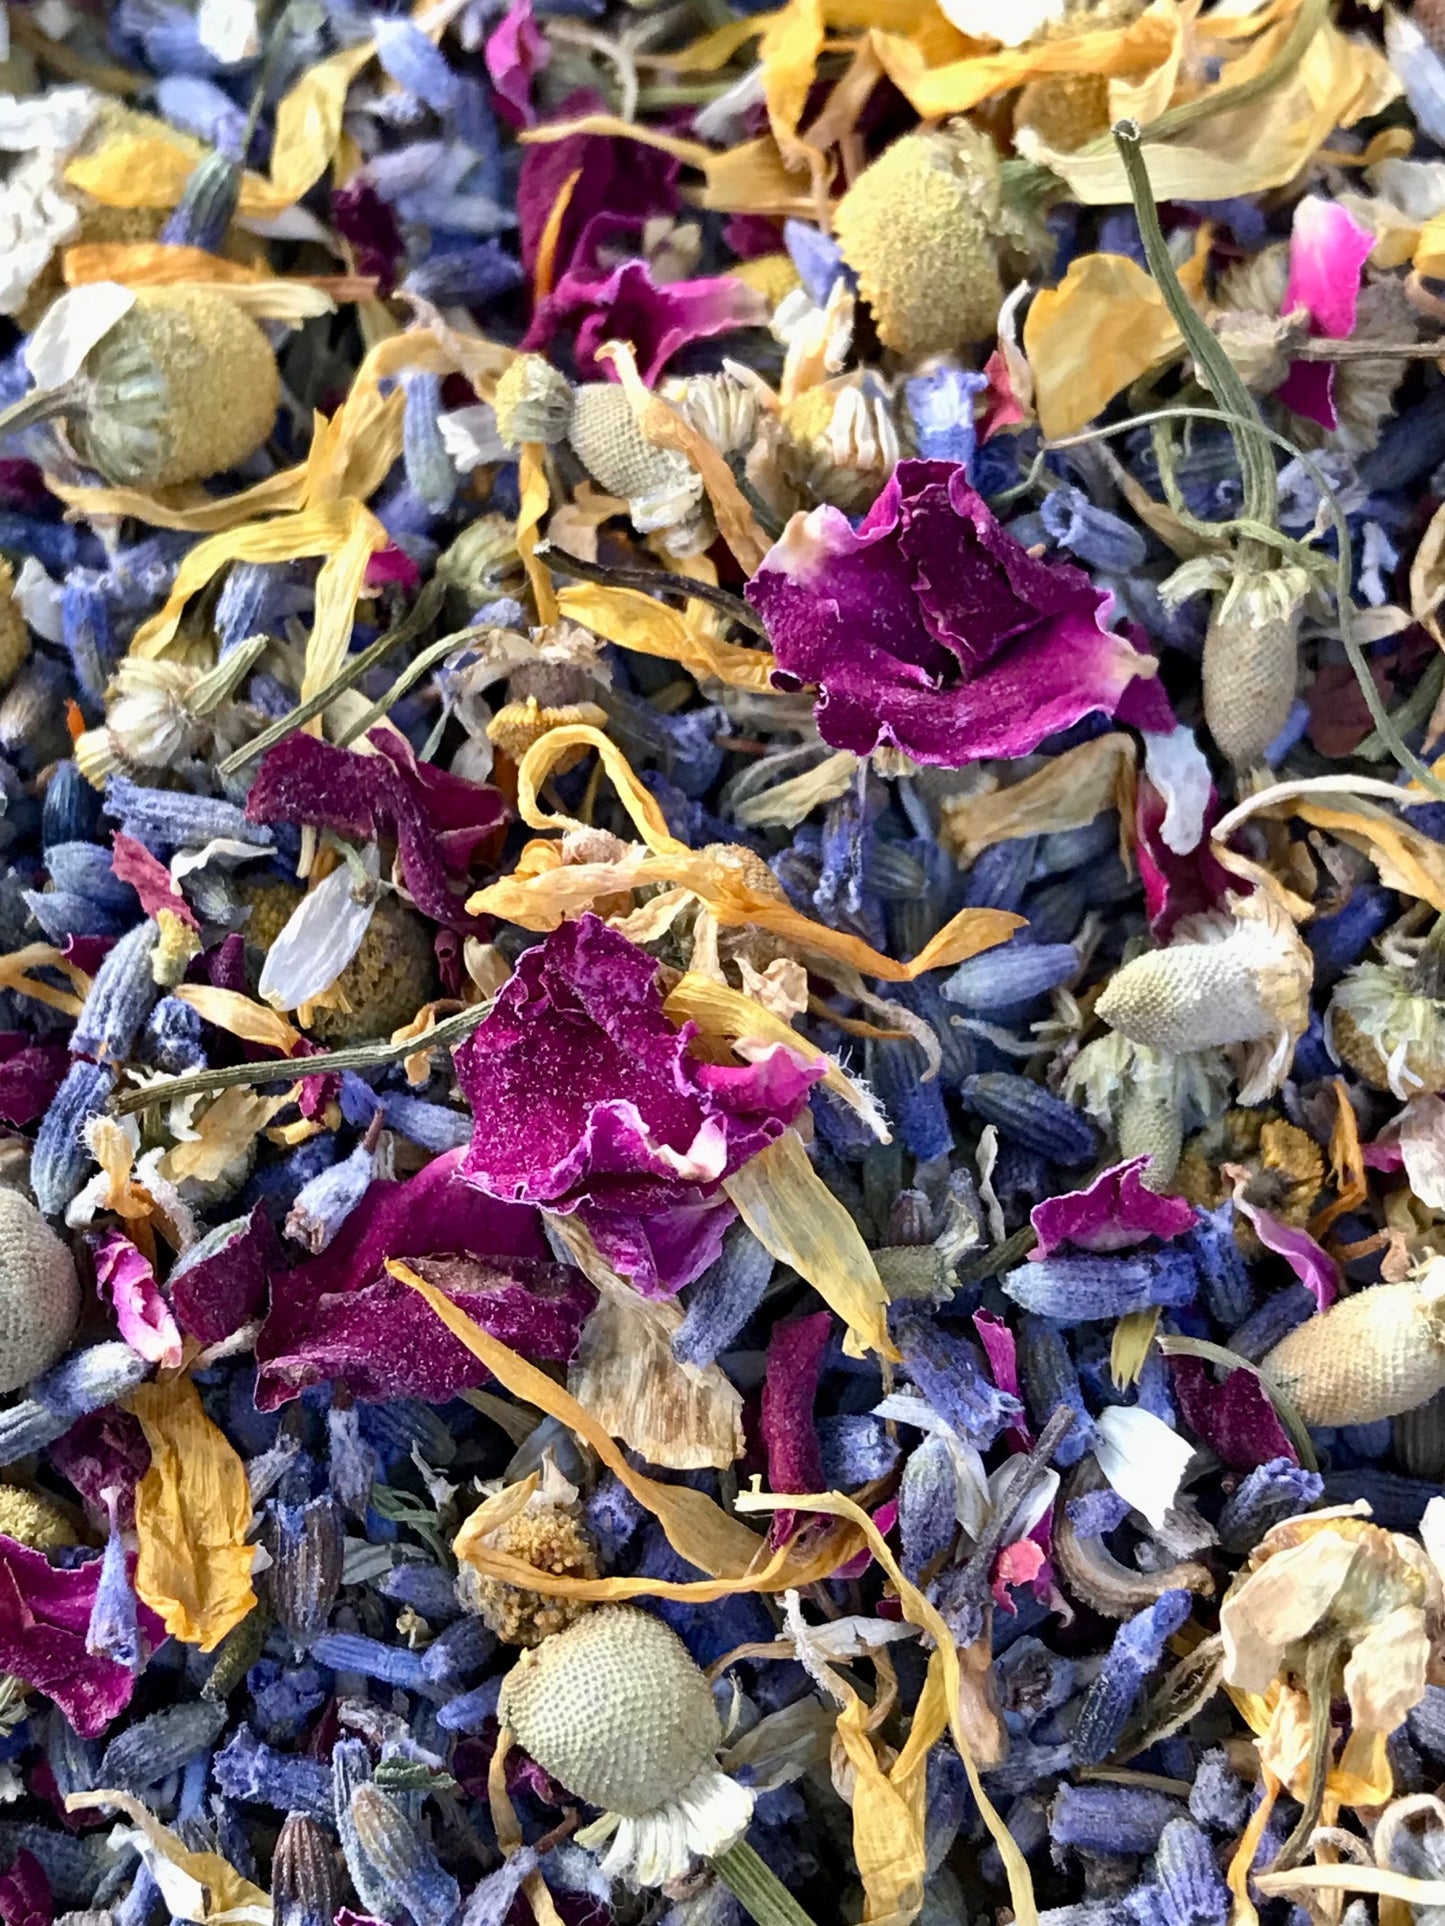 Herbal Tea Crafting Workshop - March 16th, 2pm